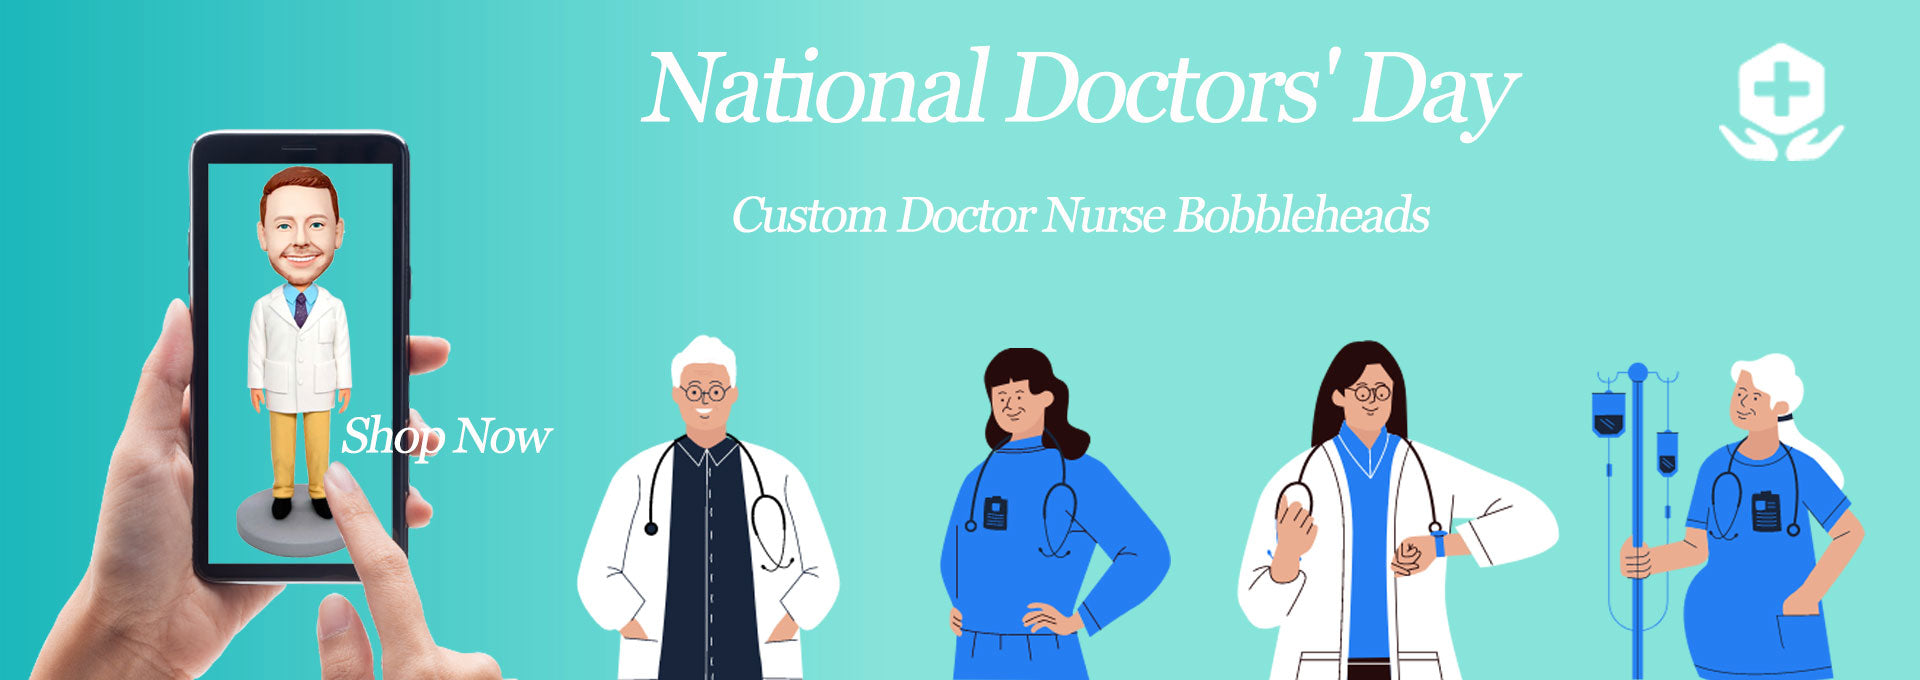 Custom Doctor Bobbleheads As National Doctor's Day Gifts